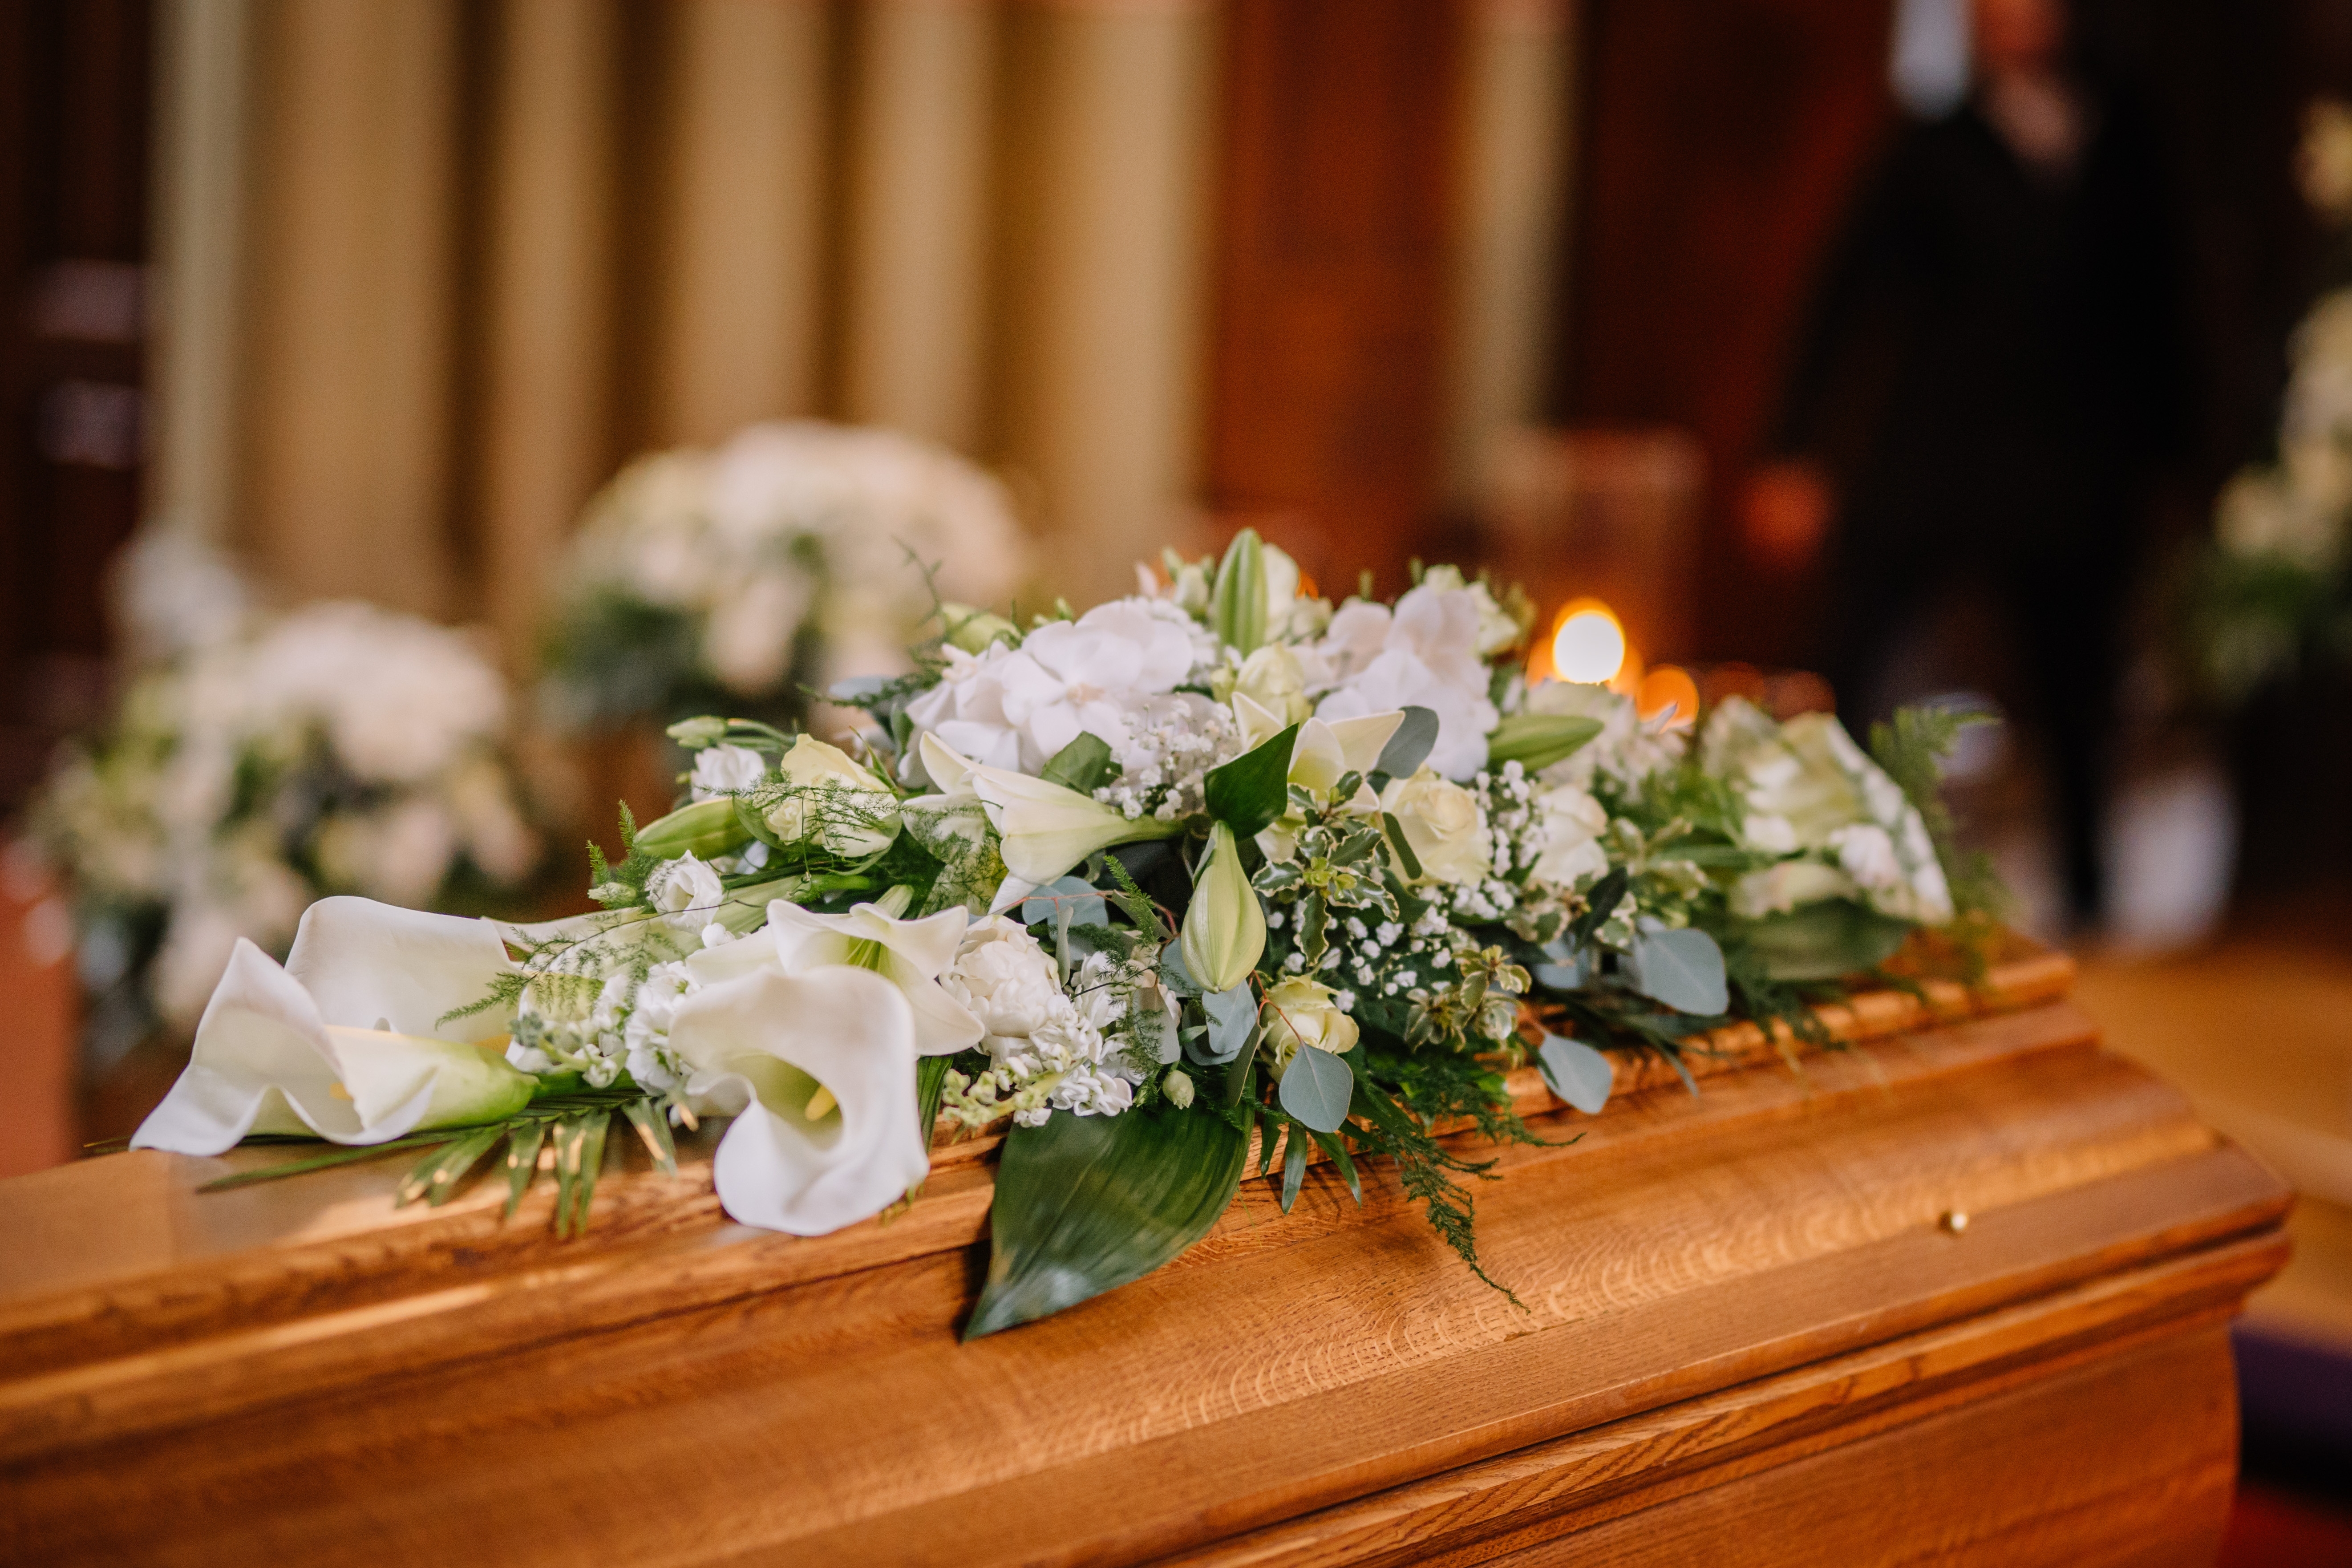 Coffin with flowers on | Shutterstock